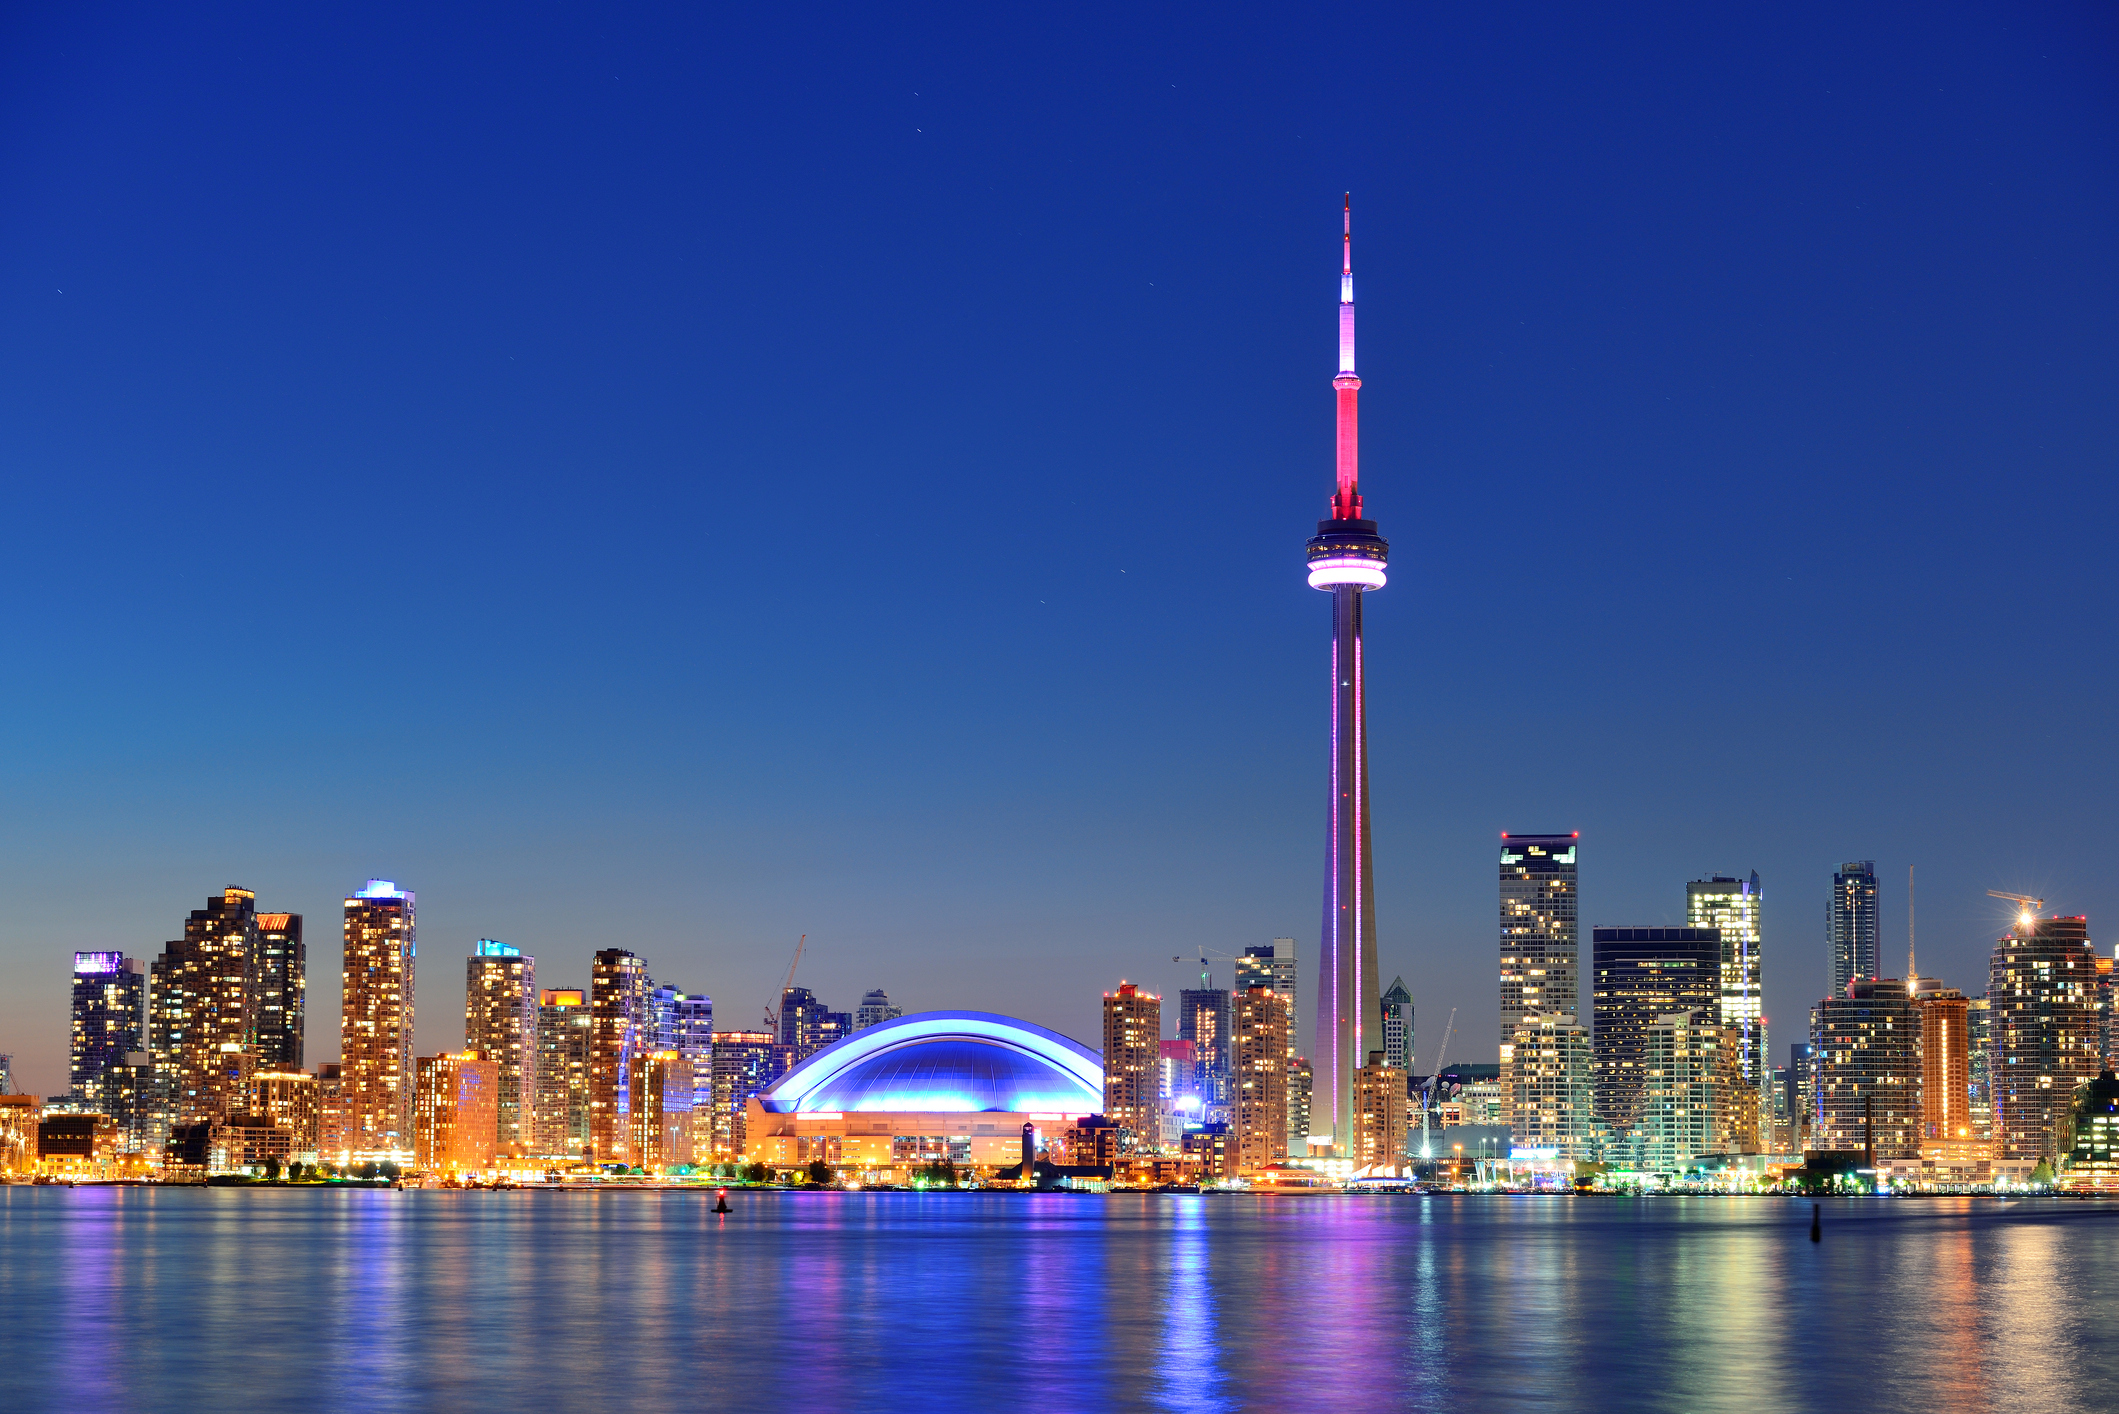 Ontario’s Leading iGaming Development in Canada